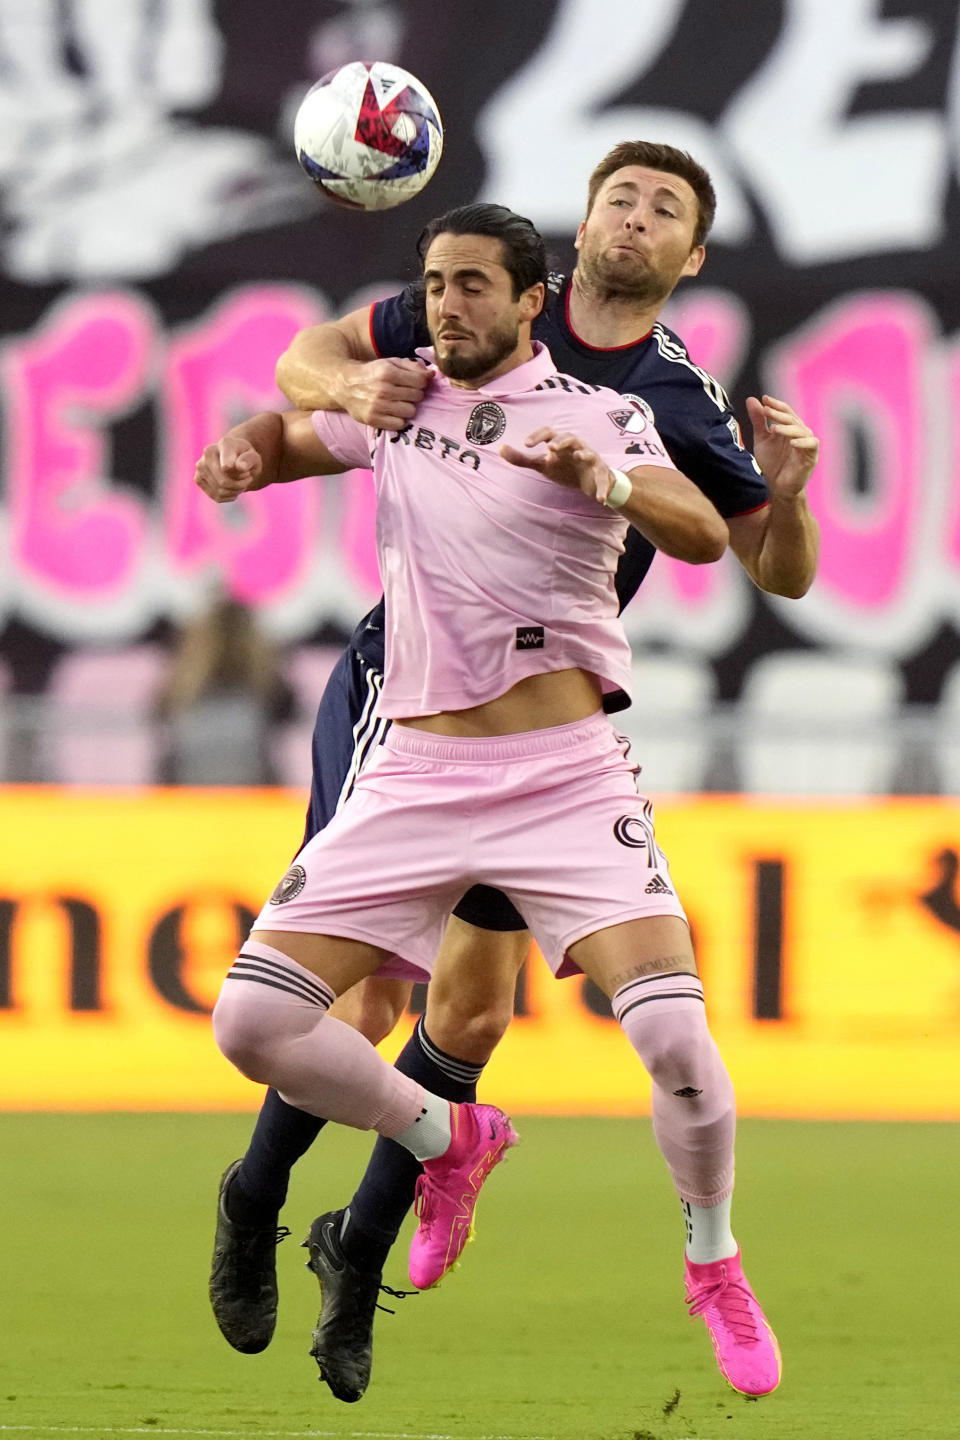 Inter Miami forward Leonardo Campana heads in the ball in front of a New England Revolution defender during the first half of an MLS soccer match, Saturday, May 13, 2023, in Fort Lauderdale, Fla. (AP Photo/Lynne Sladky)